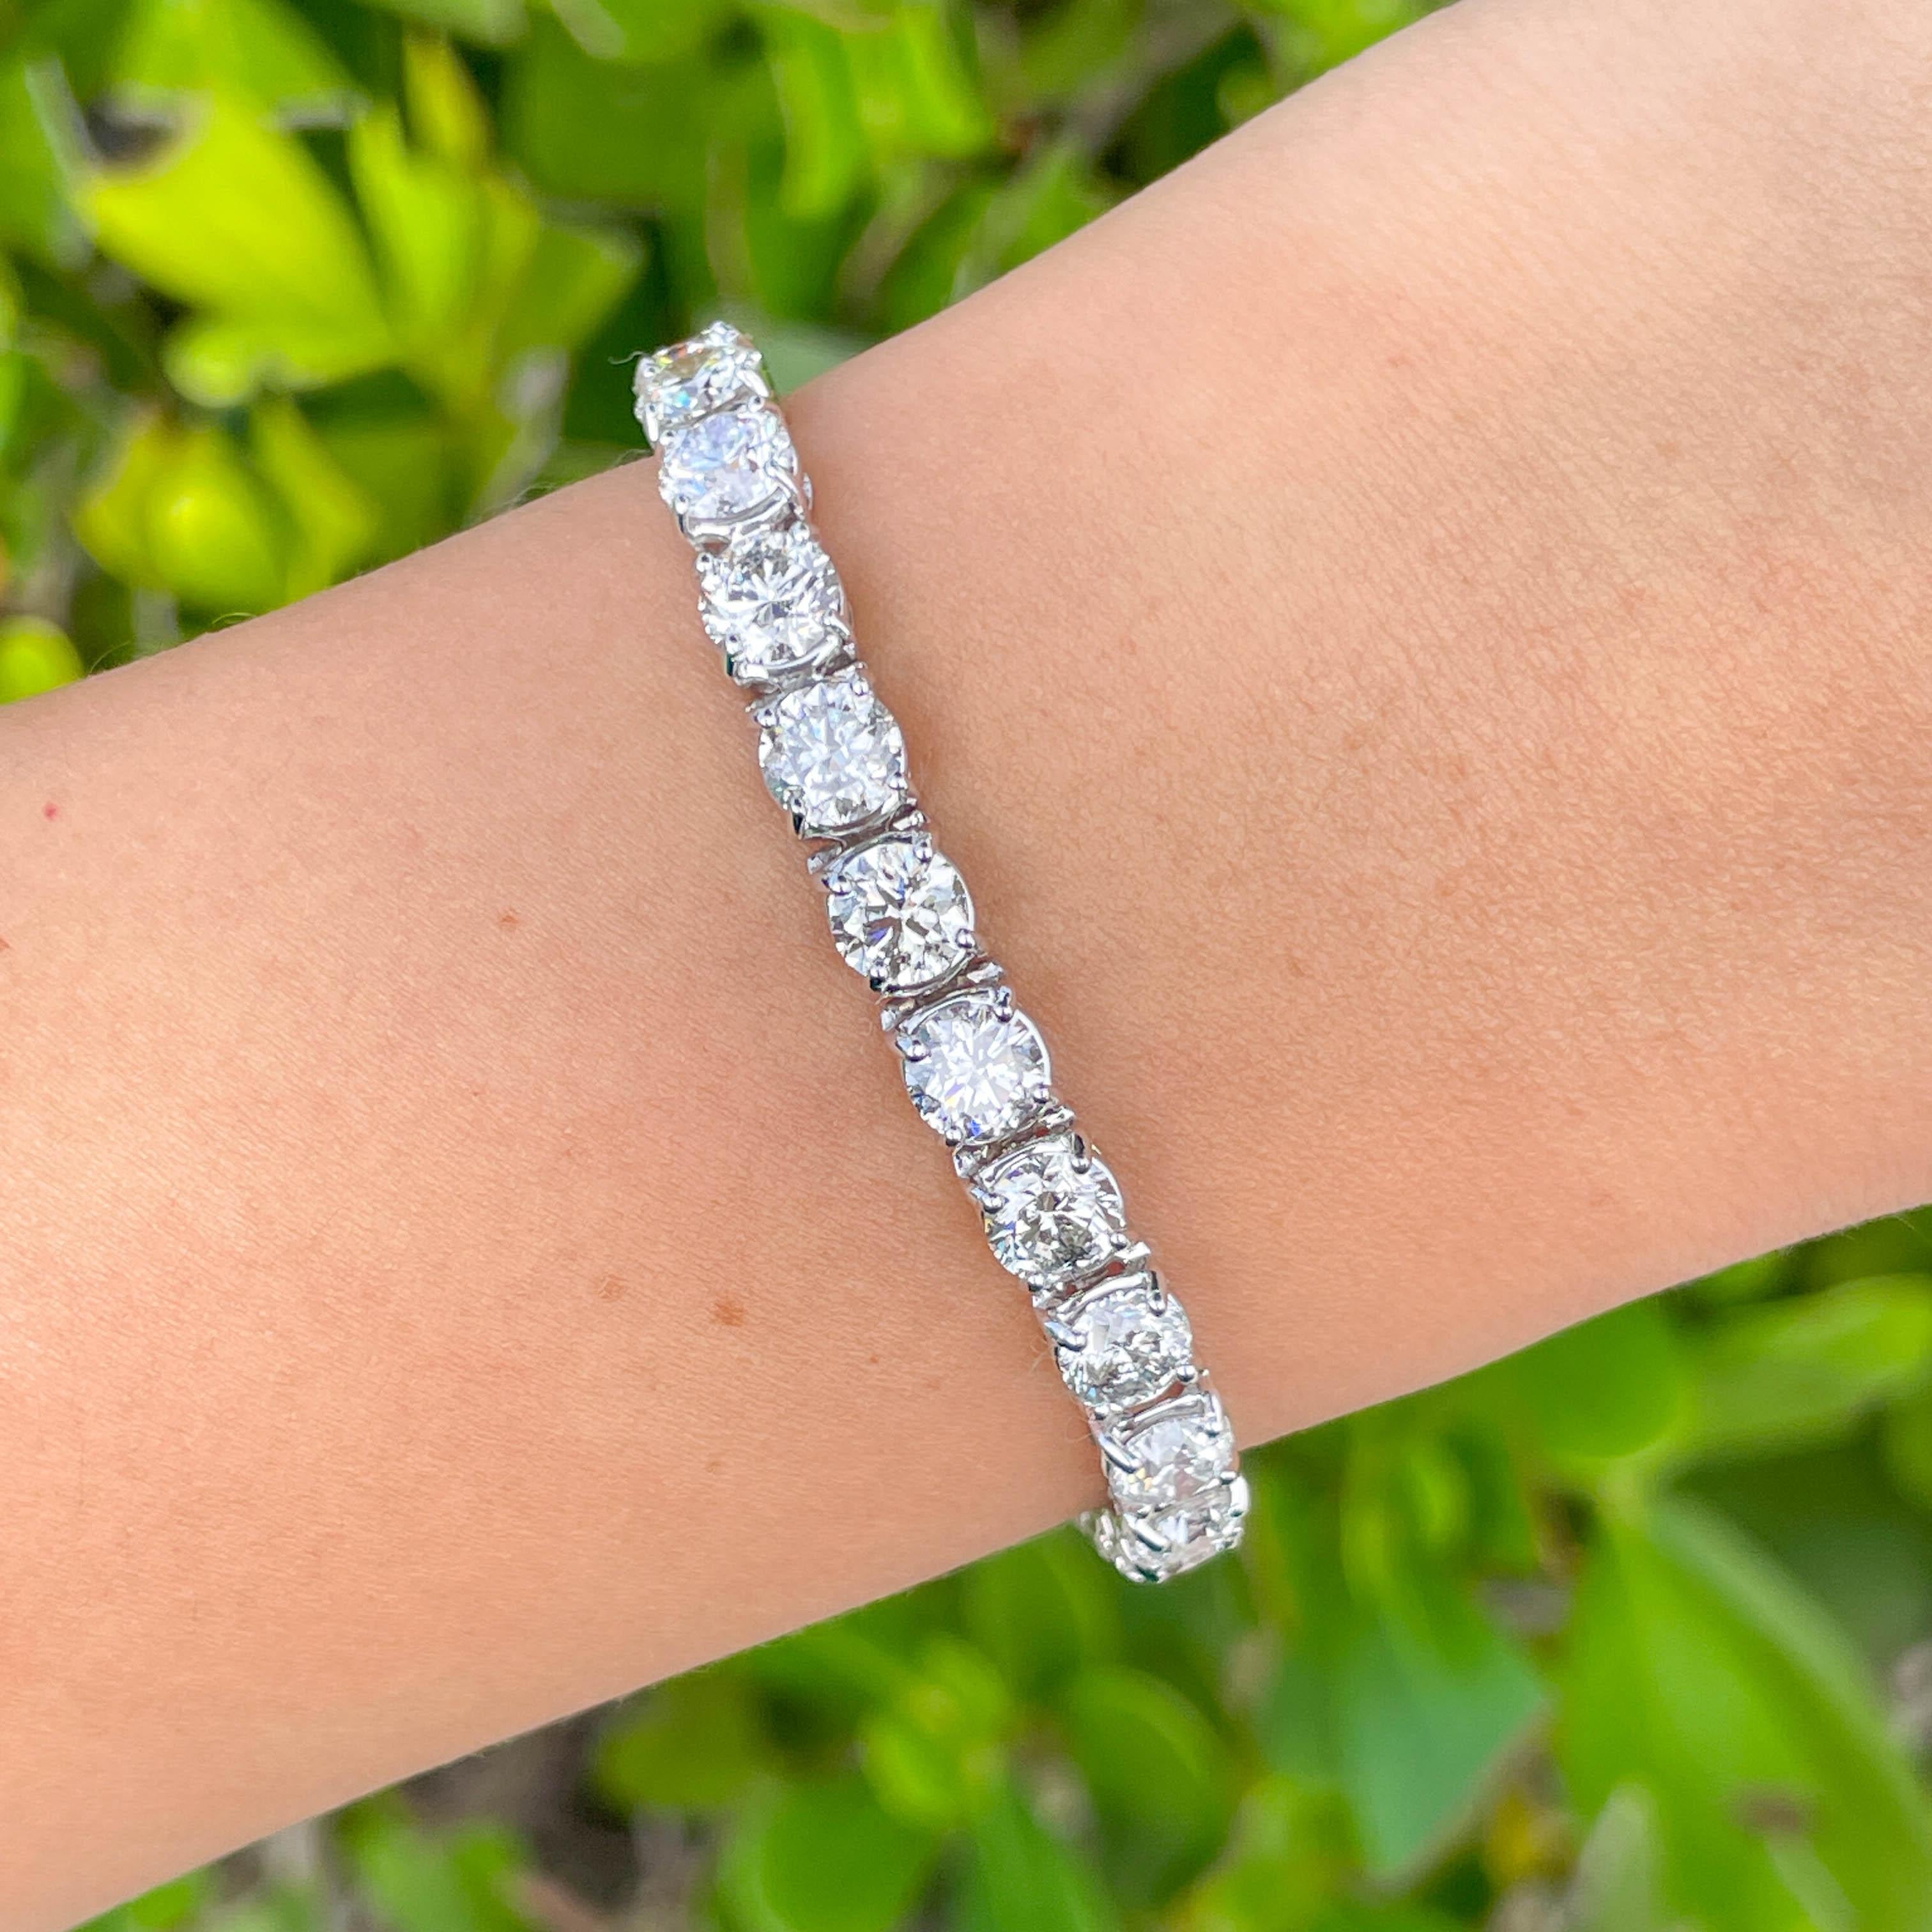 Jay Feder 18k White Gold Round Diamond Tennis Bracelet

Set with 27 round brilliant diamonds; total weight is 19.22ctw. 

The bracelet is 7 inches long. Total weight is 18.5 grams.

Please view our photos and videos for more details.

Good